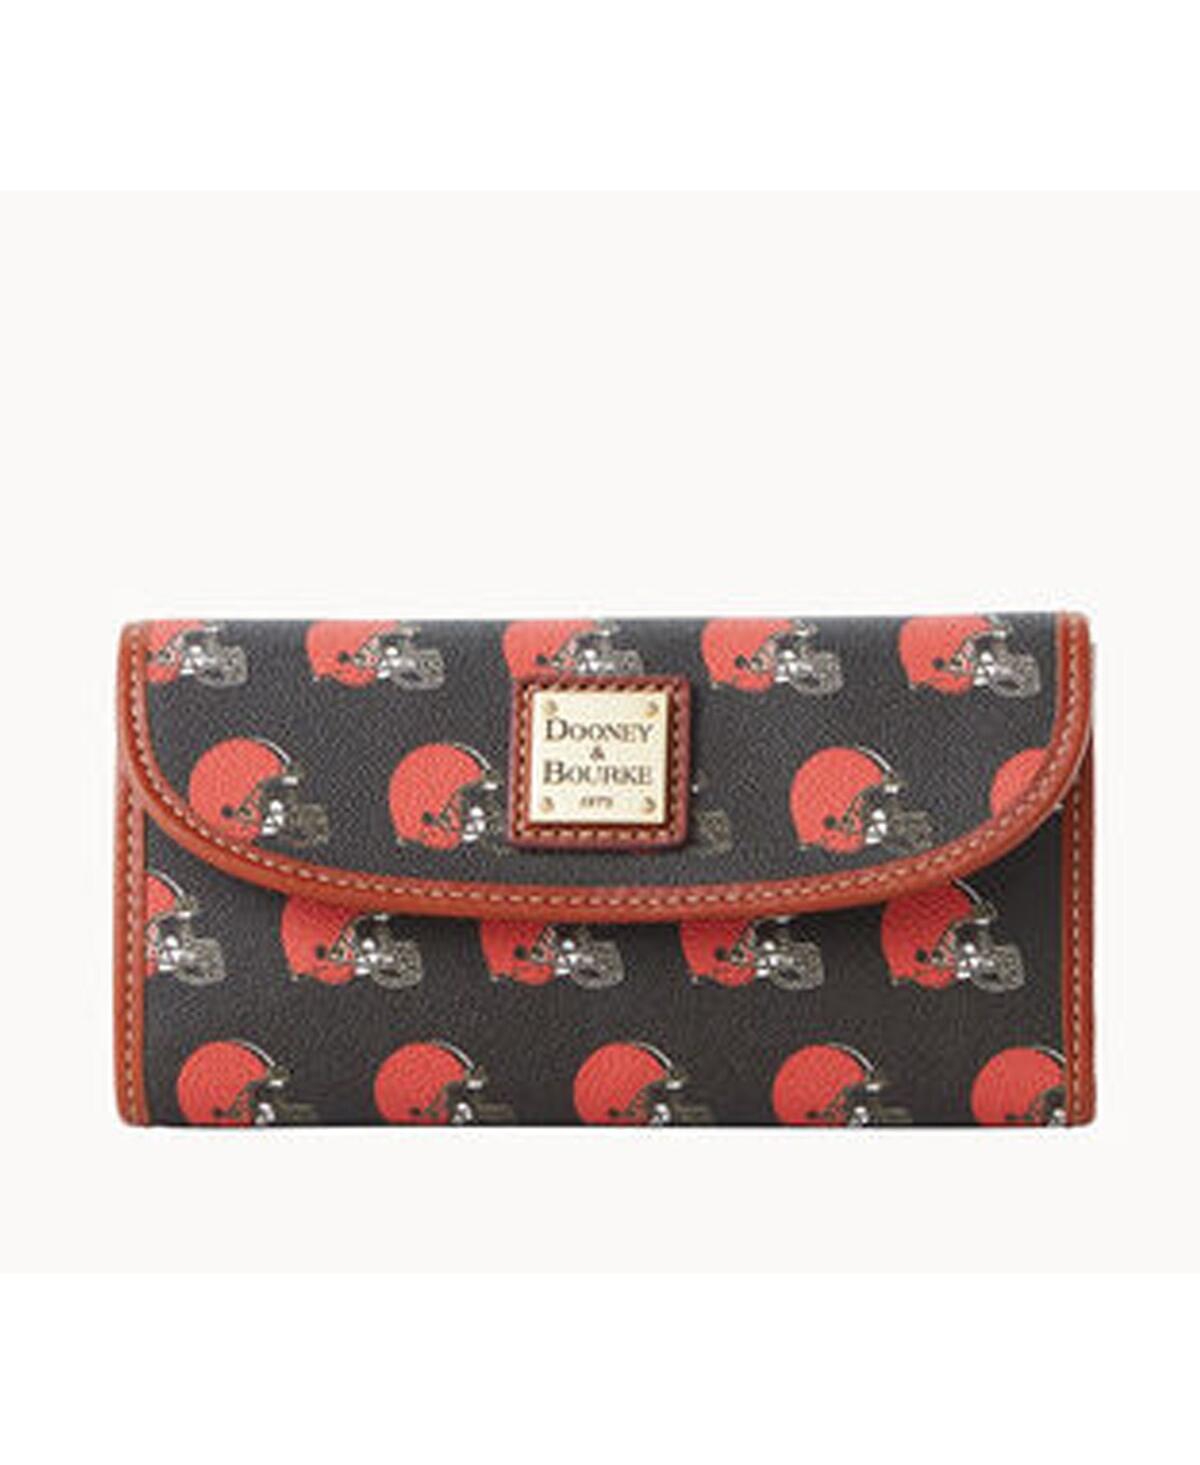 Women's Dooney & Bourke Cleveland Browns Team Color Continental Clutch - Red, Black